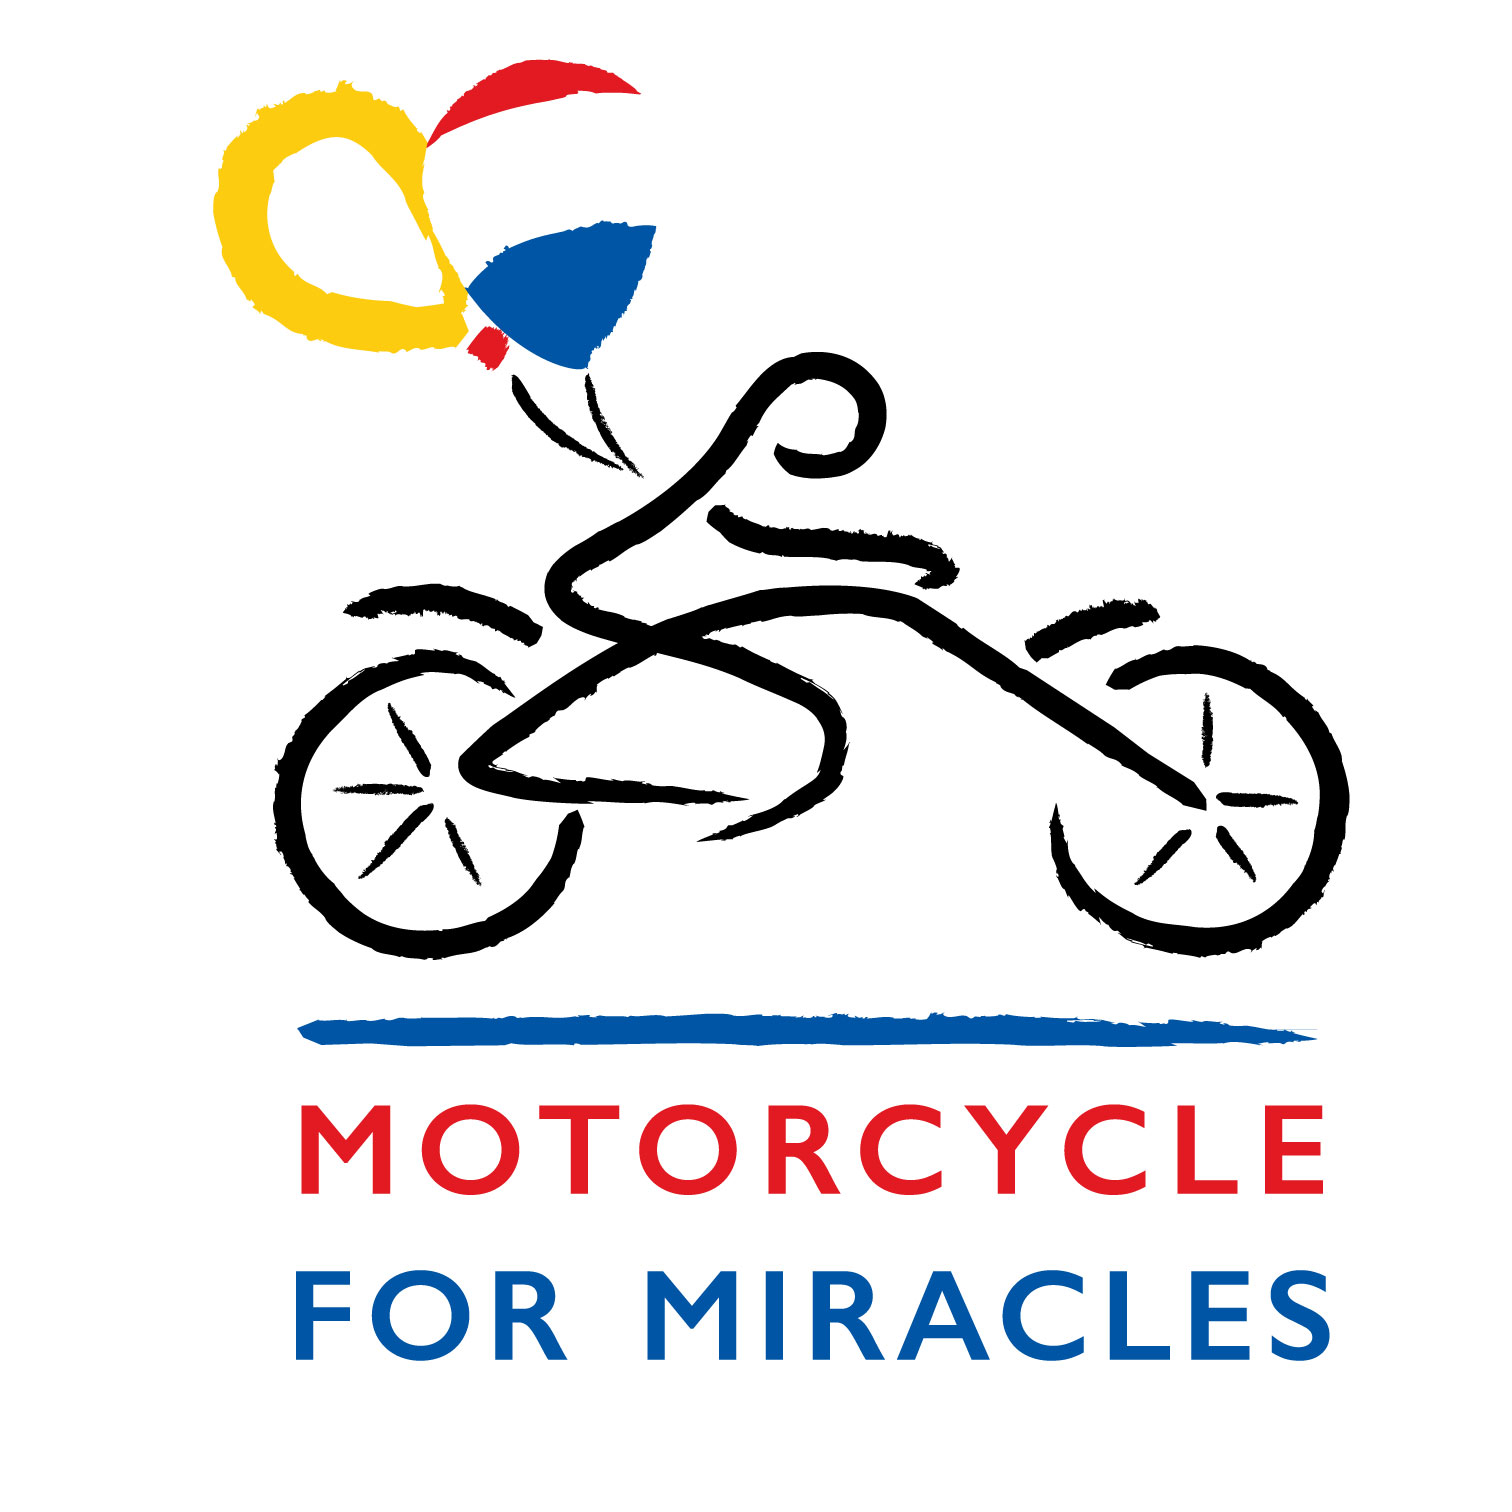 Motorcycle for Miracles